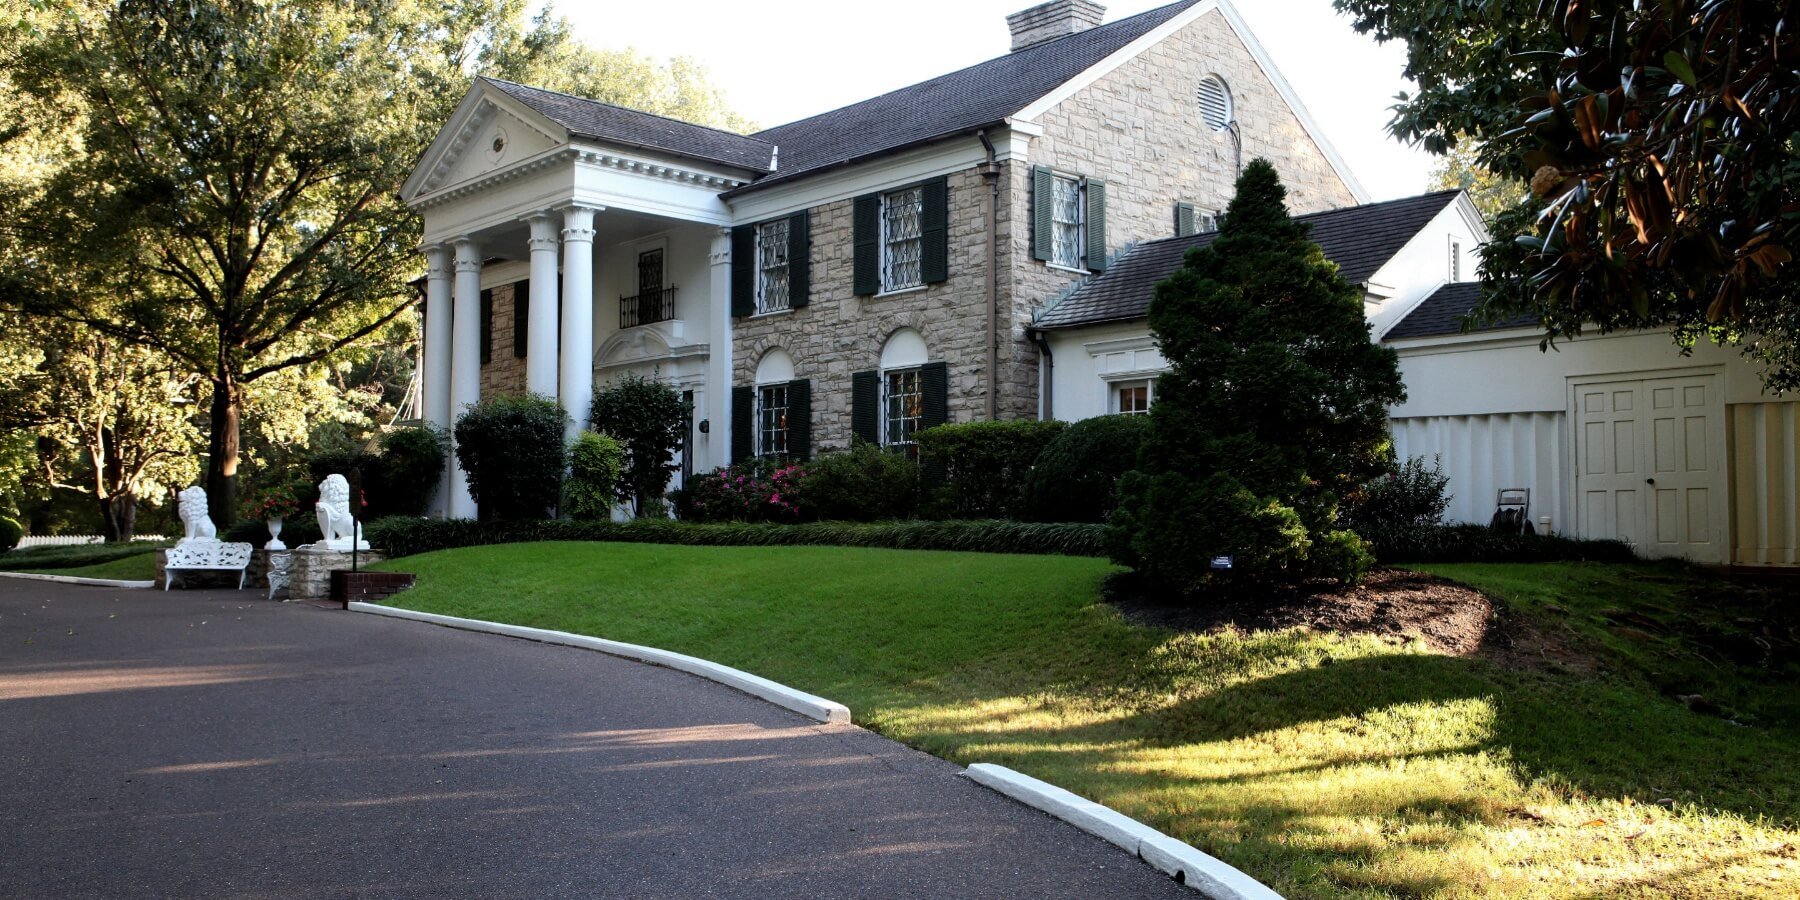 A front view of Elvis Presley's Graceland home, located in Memphis, TN